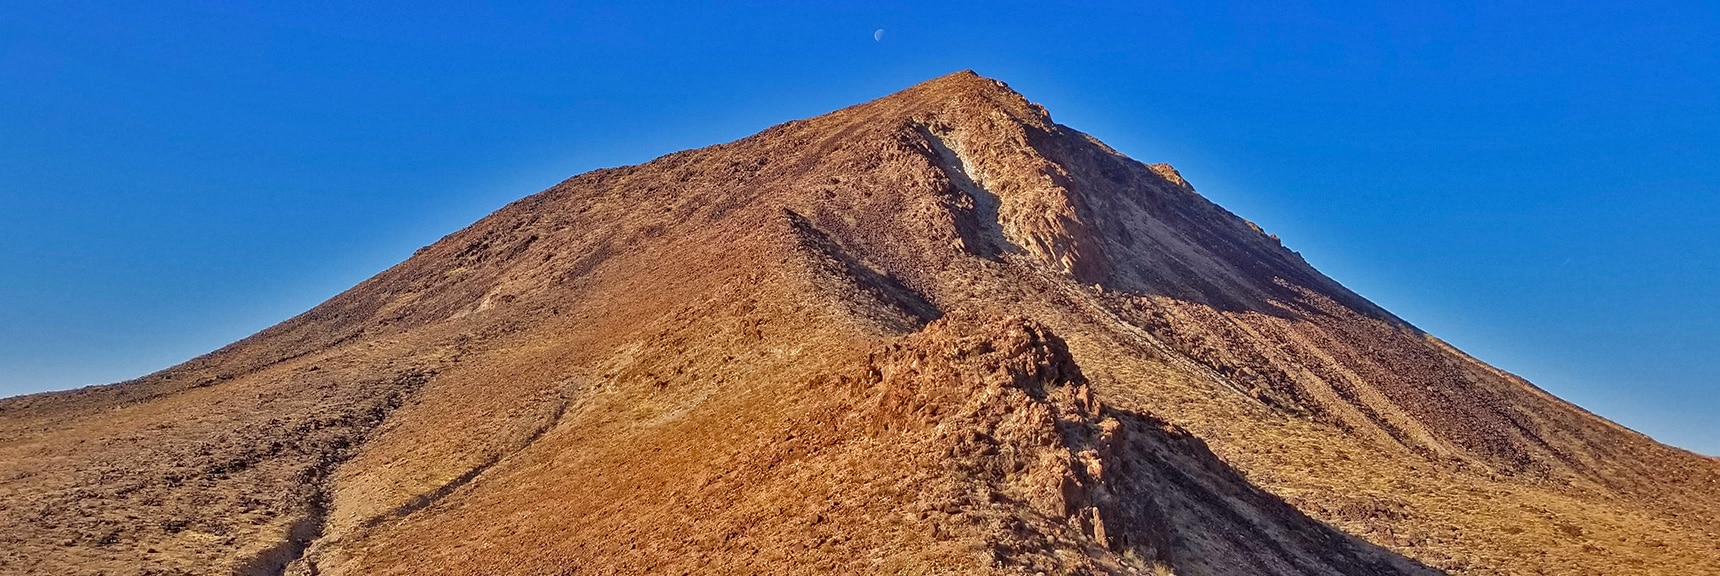 Final Approach on the Northeast Side of Lava Butte. Setting Moon Visible Above. | Lava Butte | Lake Mead National Recreation Area, Nevada